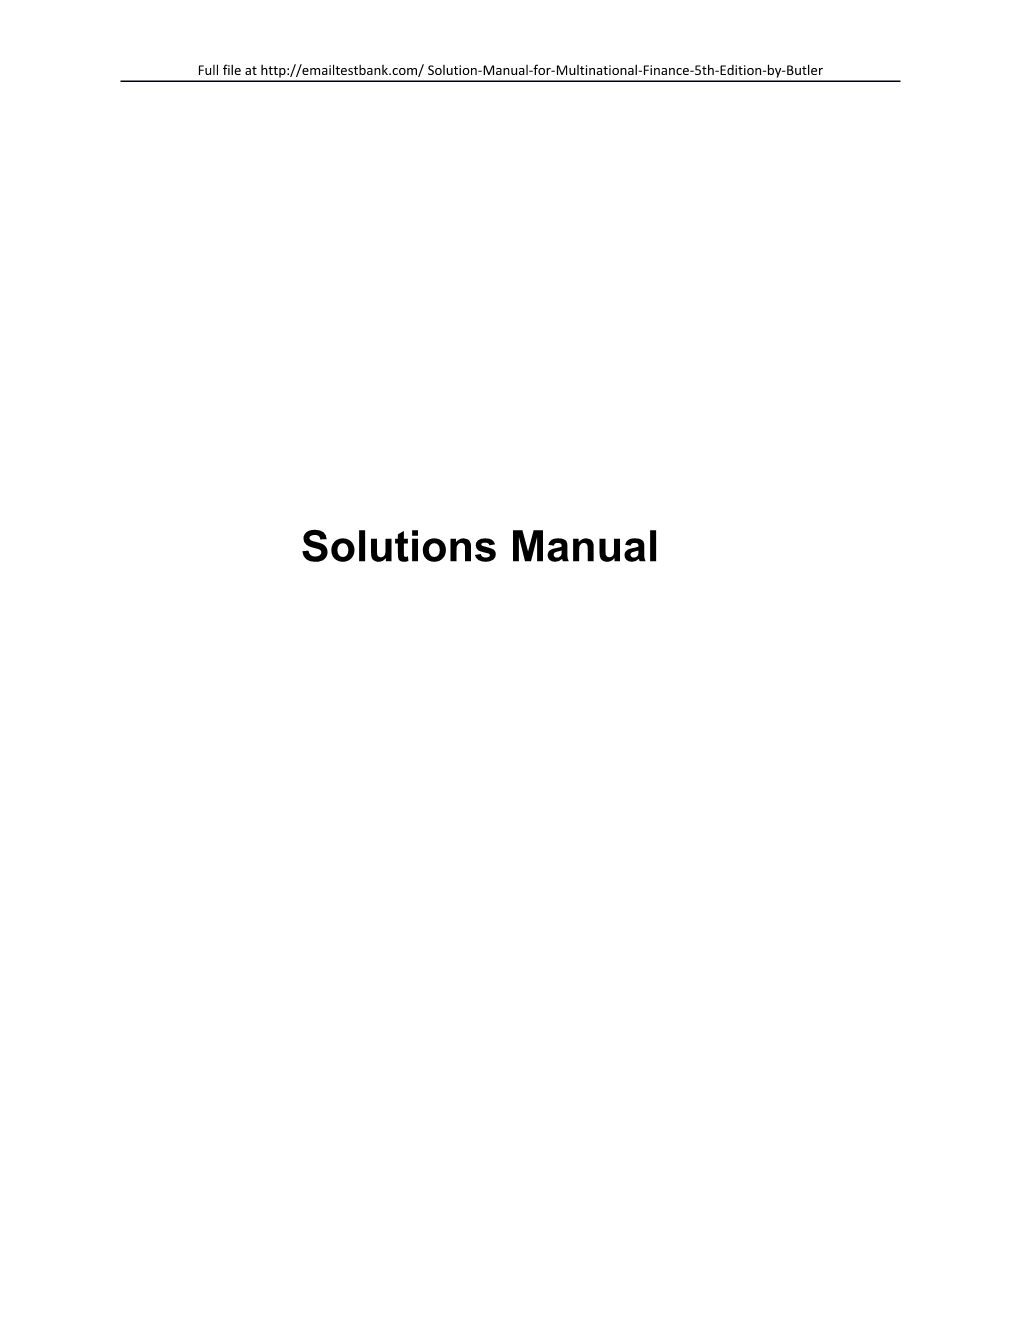 Full File at Solution-Manual-For-Multinational-Finance-5Th-Edition-By-Butler